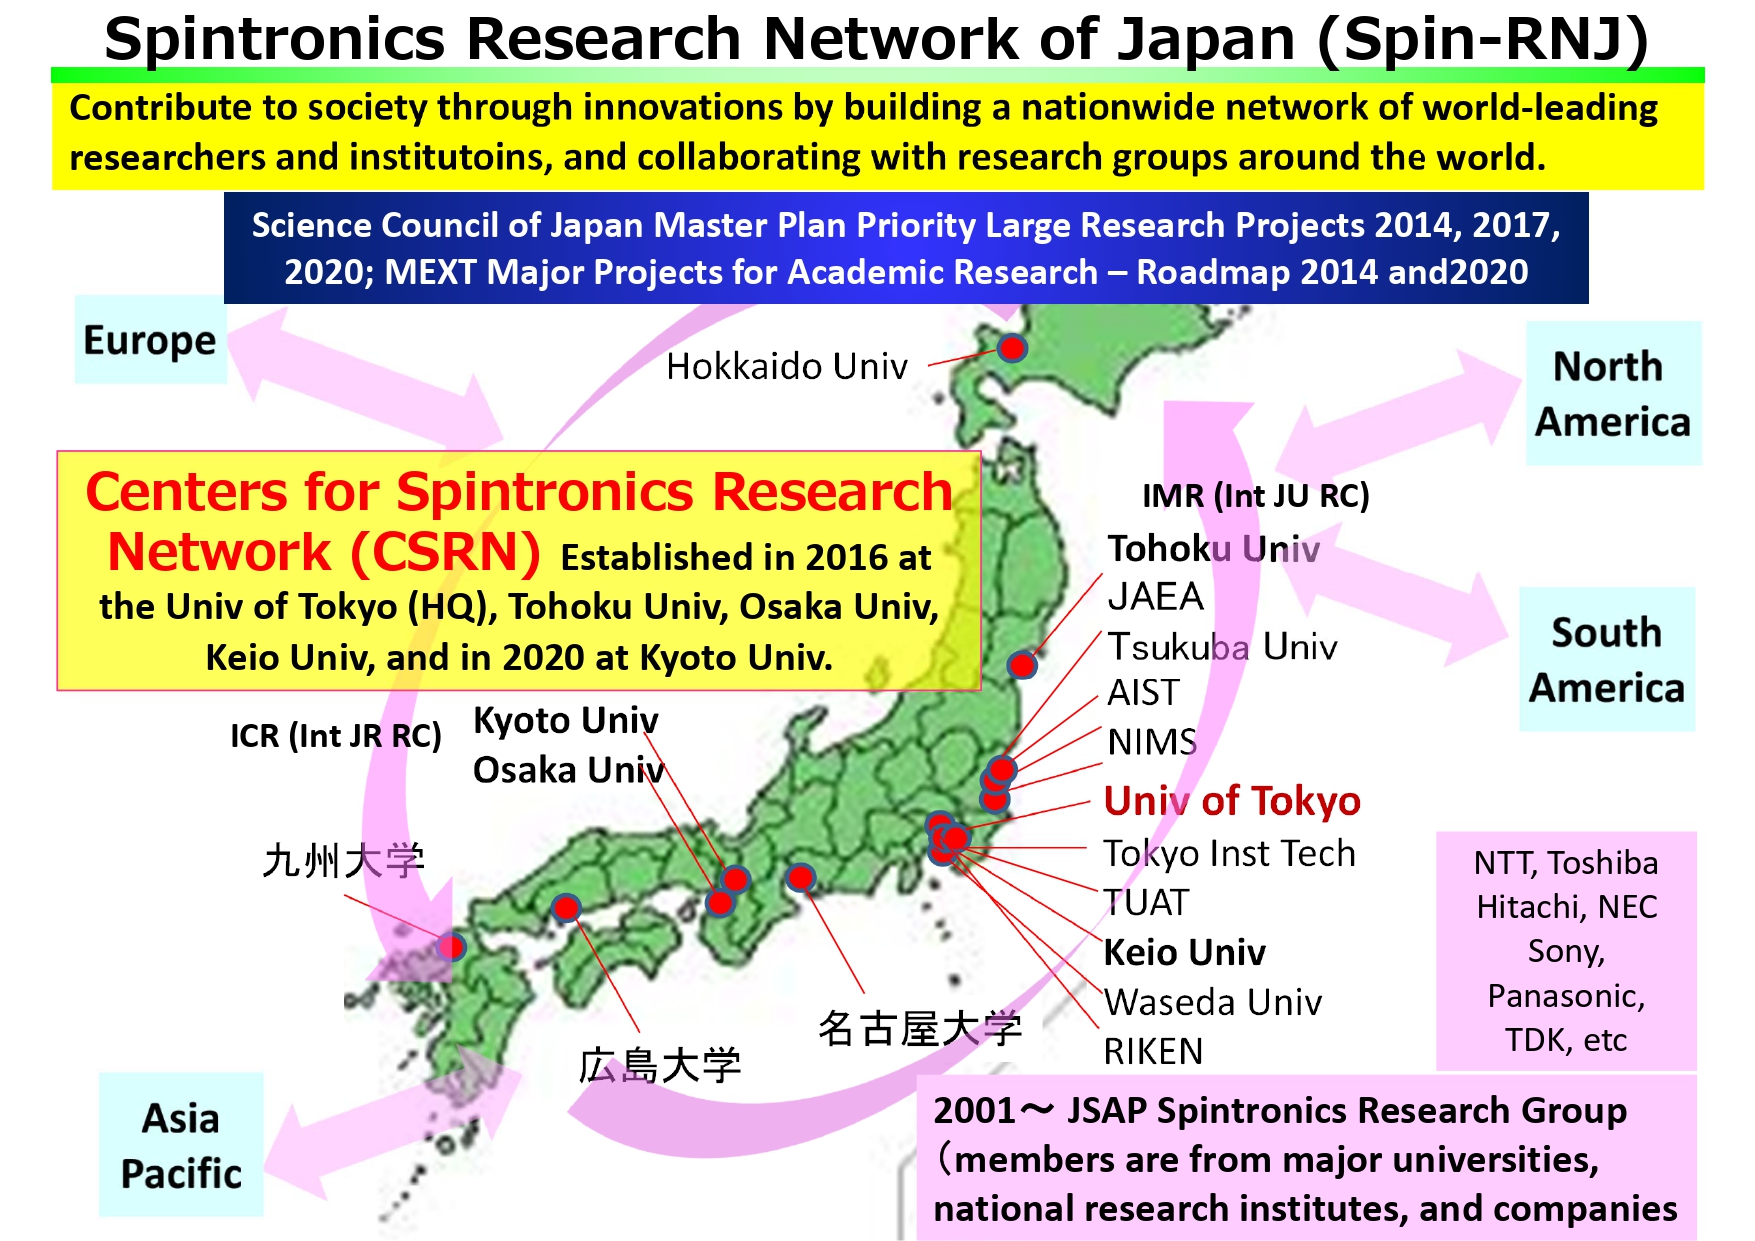 Overview of the Spintronics Research Network of Japan (Spin-RNJ).